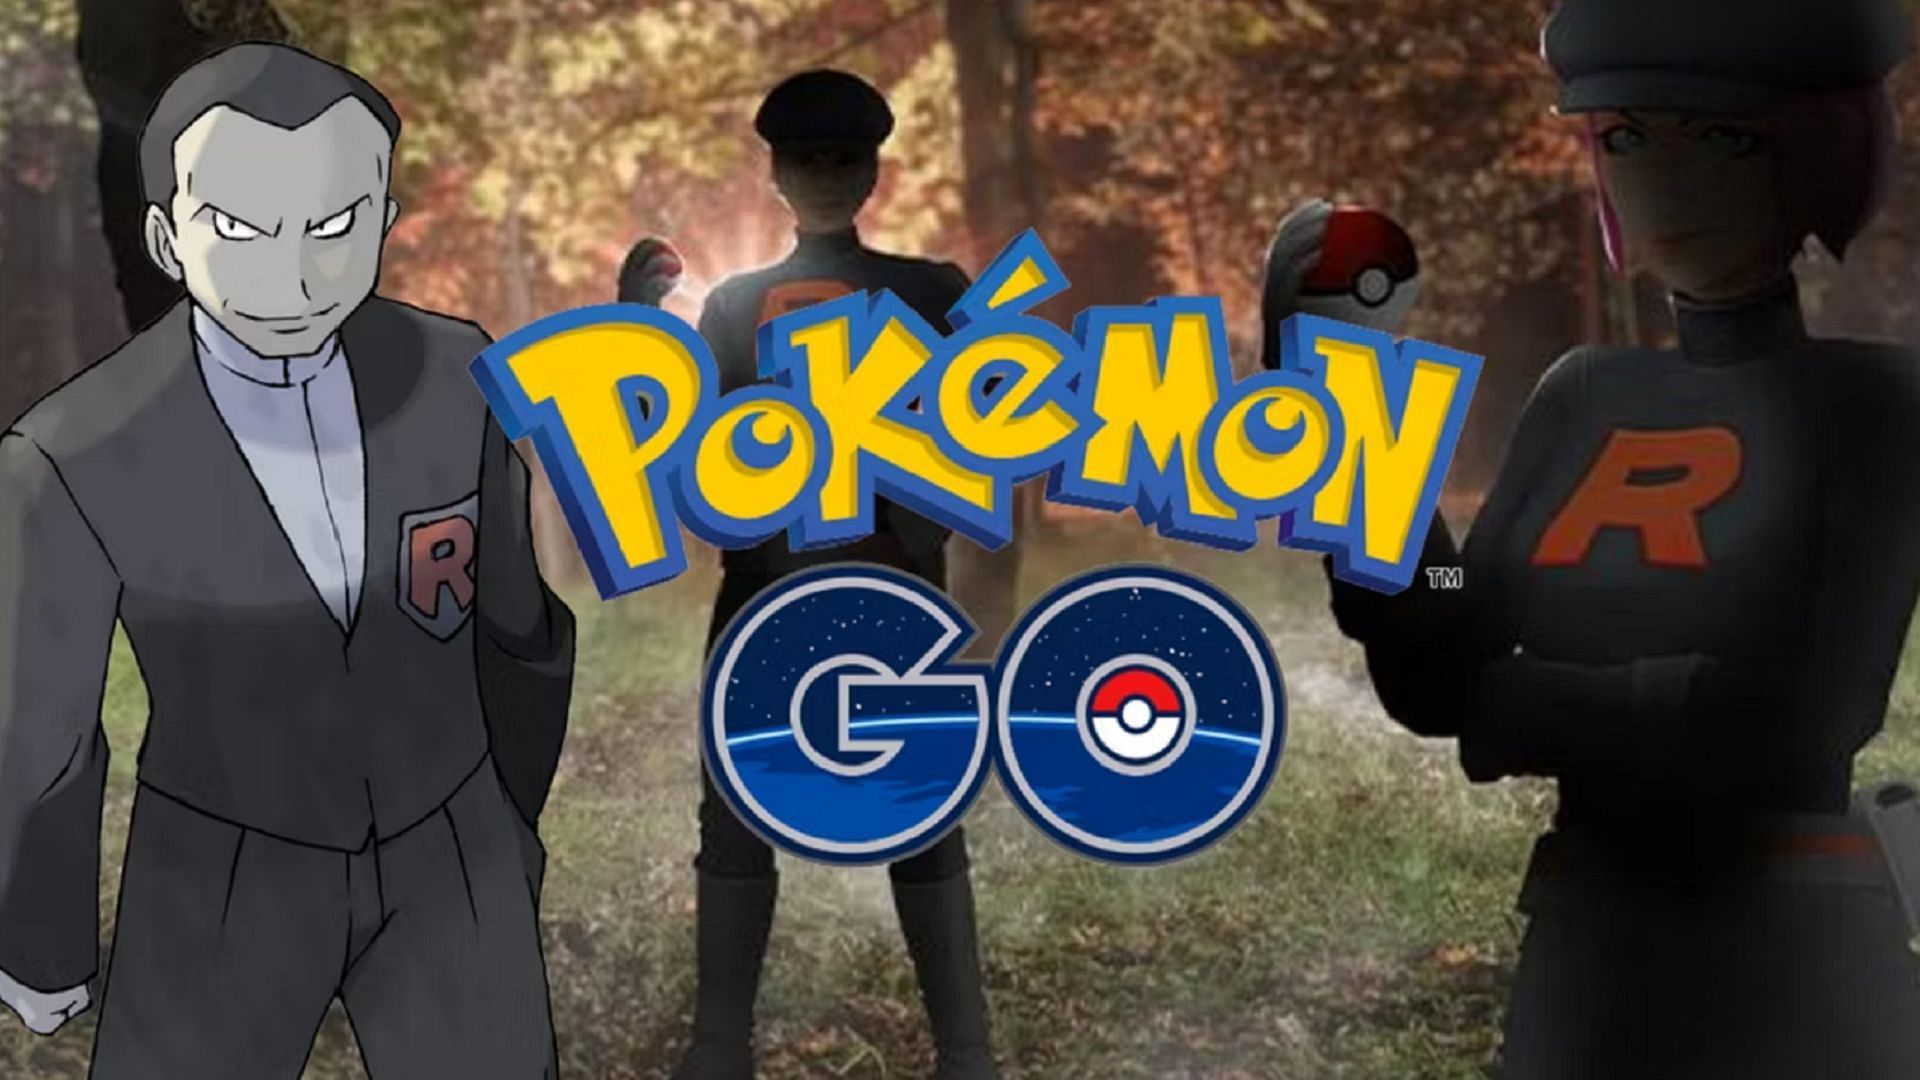 Giovanni is returning to lead his minions in an upcoming Pokemon GO event (Image via Niantic)